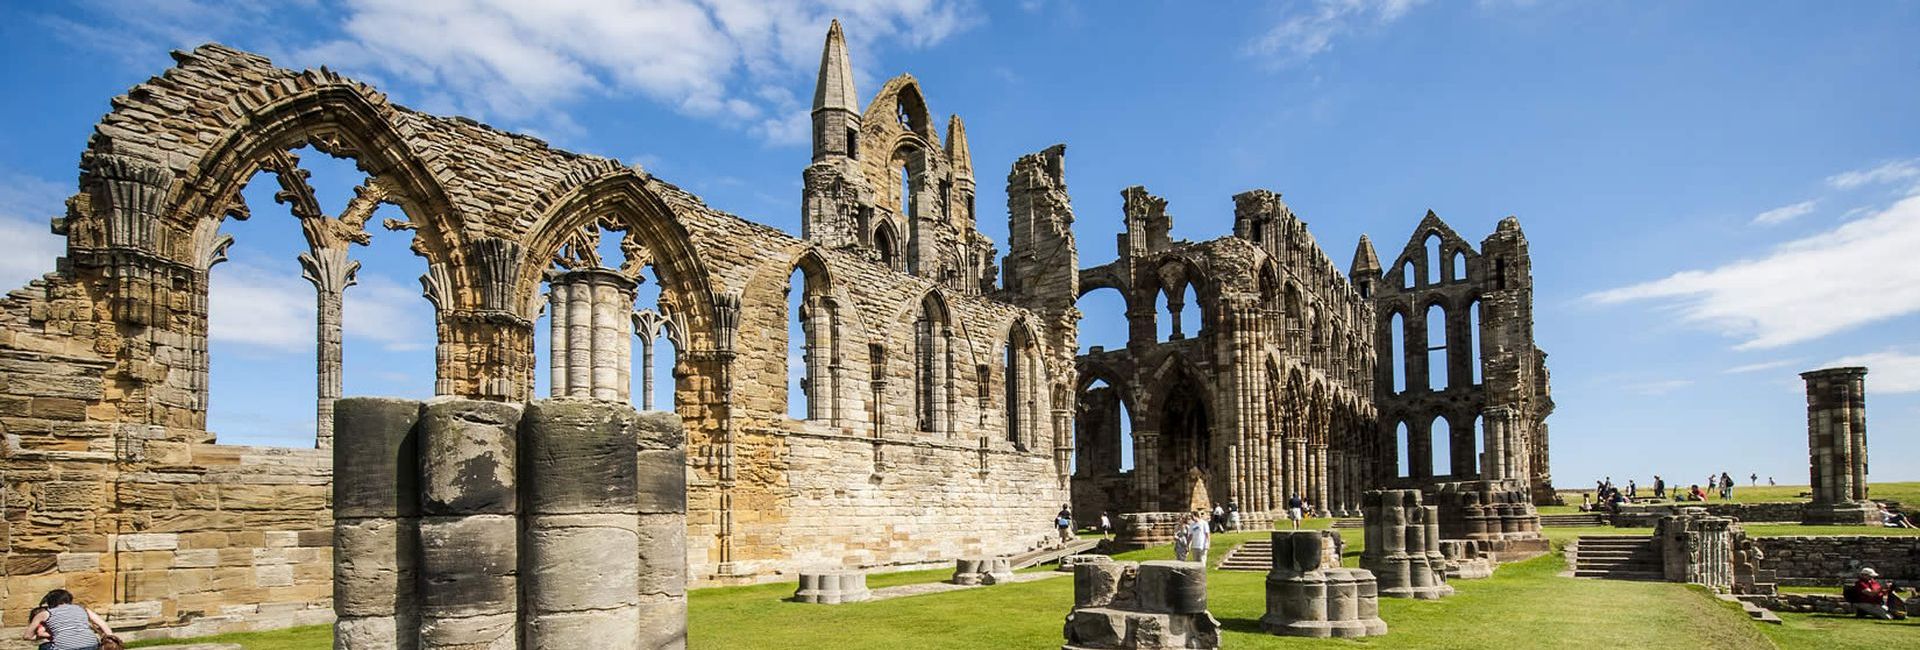 Ruins of the Whitby Abbey in North Yorkshire